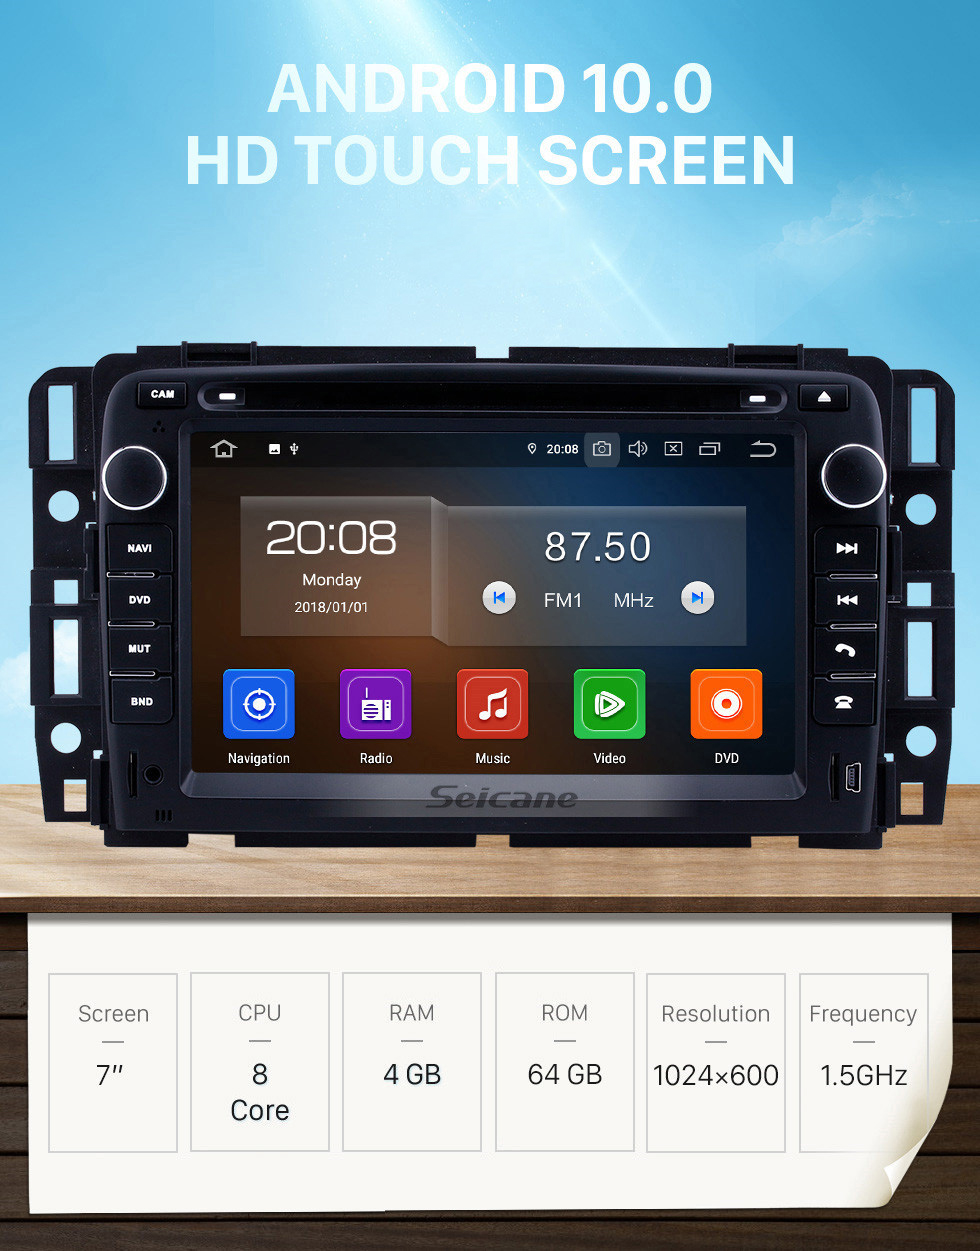 WiFi Android 8.1 touch screen Double Din car stereo with gps navigation 7 INCH HD Touch Screen GPS In Dash Navigation Wifi TV Car Stereo for GMC/Chevrolet/ Chevy/Buick with BT Mirror Link SD Free Rear Camera USB